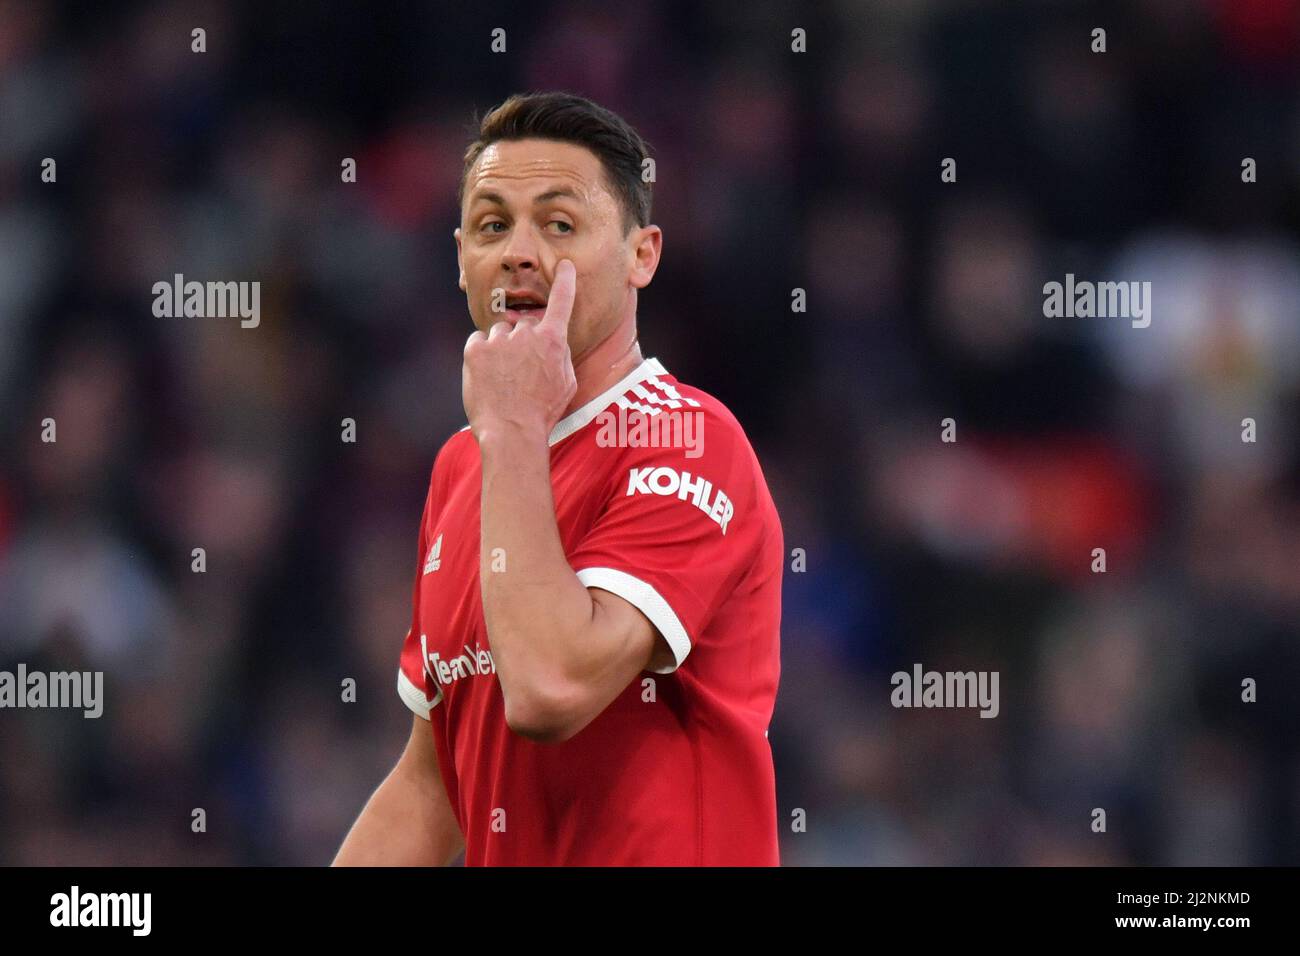 Manchester United's Nemanja Matic during the Premier League match at Old Trafford, Greater Manchester, UK. Picture date: Saturday April 2, 2022. Photo credit should read: Anthony Devlin Stock Photo